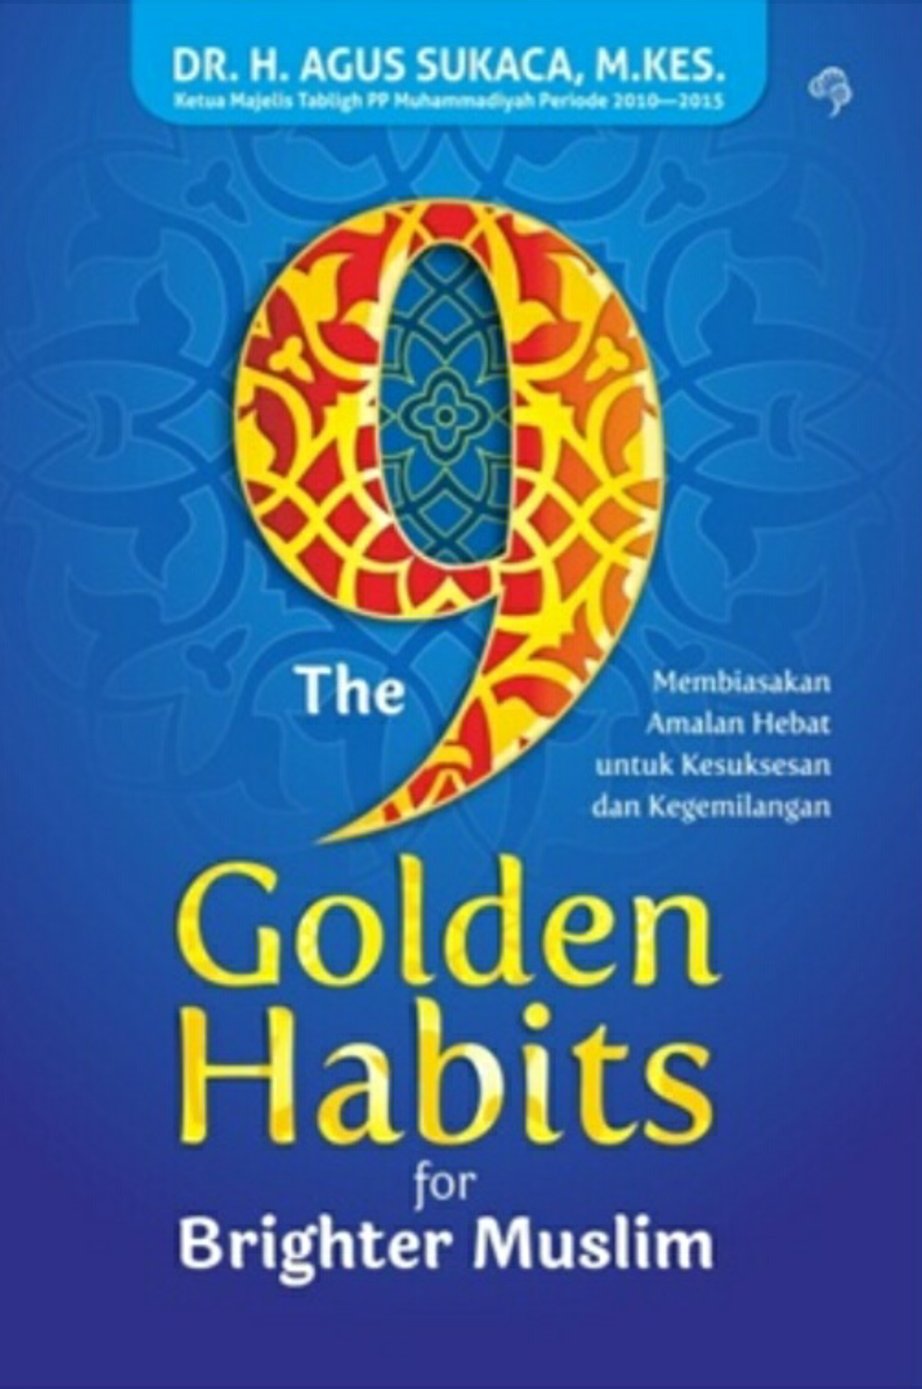 The 9 Golden Habits for Brighter Muslim